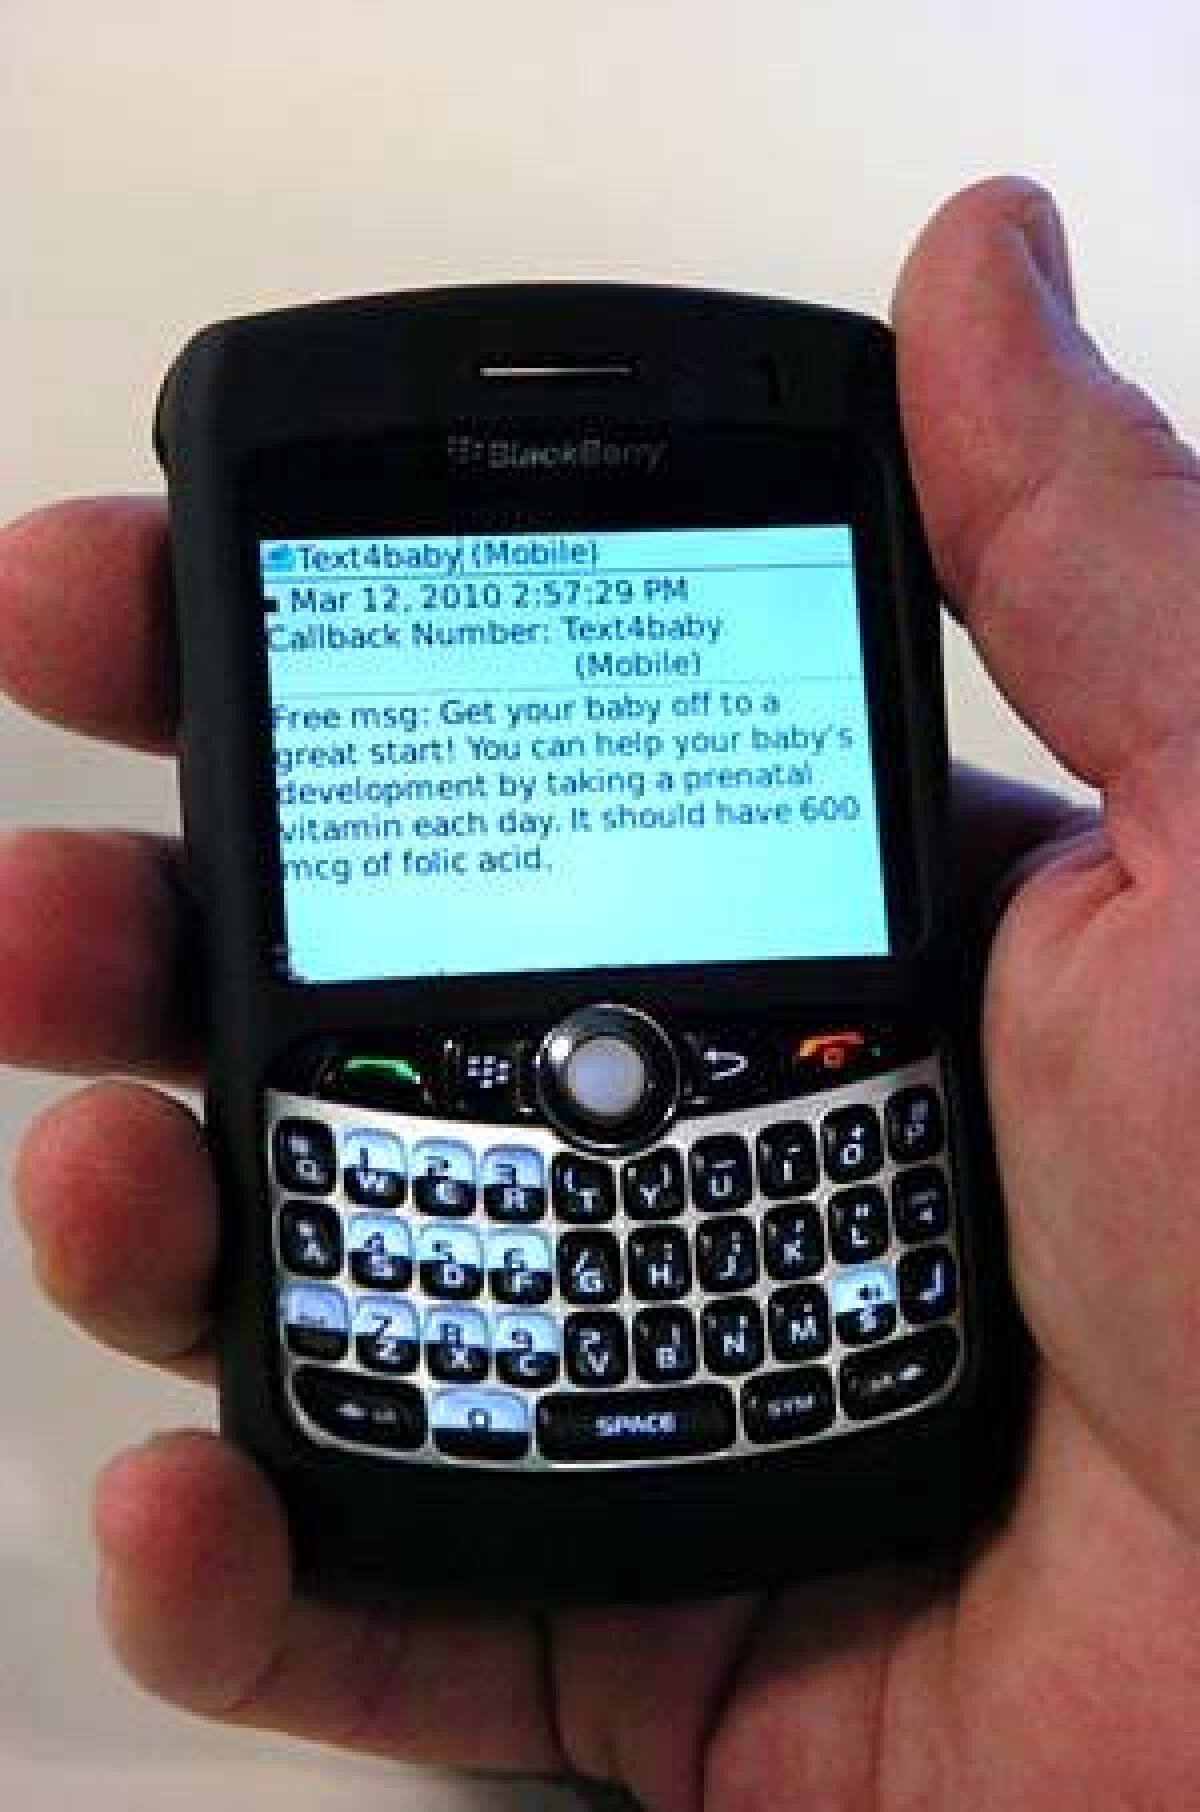 BABY TALK: A text message on a BlackBerry from text4baby offers advice to pregnant women.